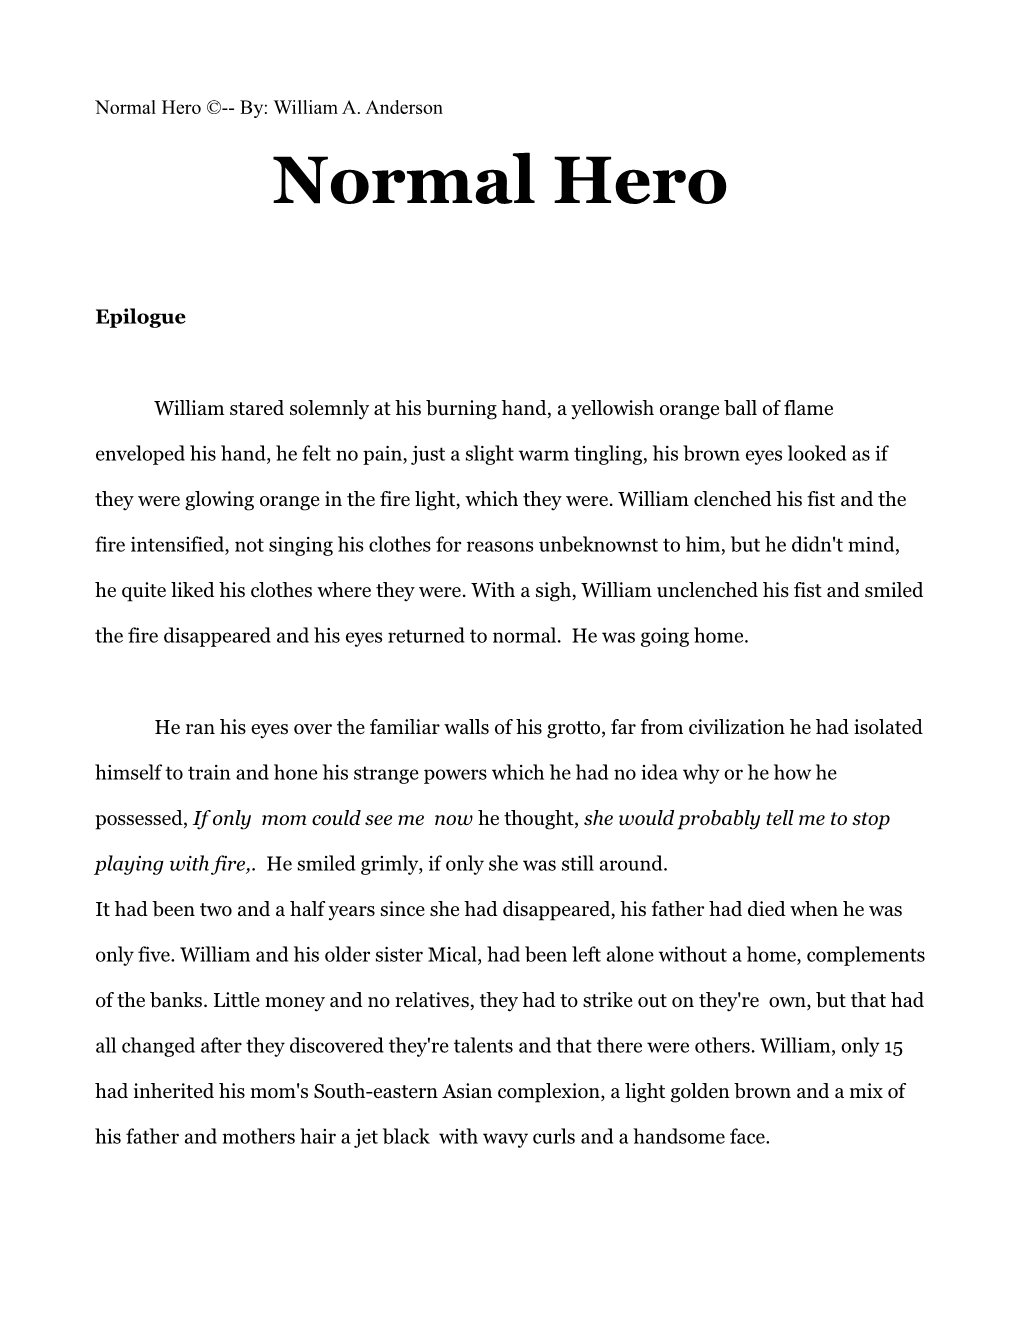 Normal Hero By: William A. Anderson